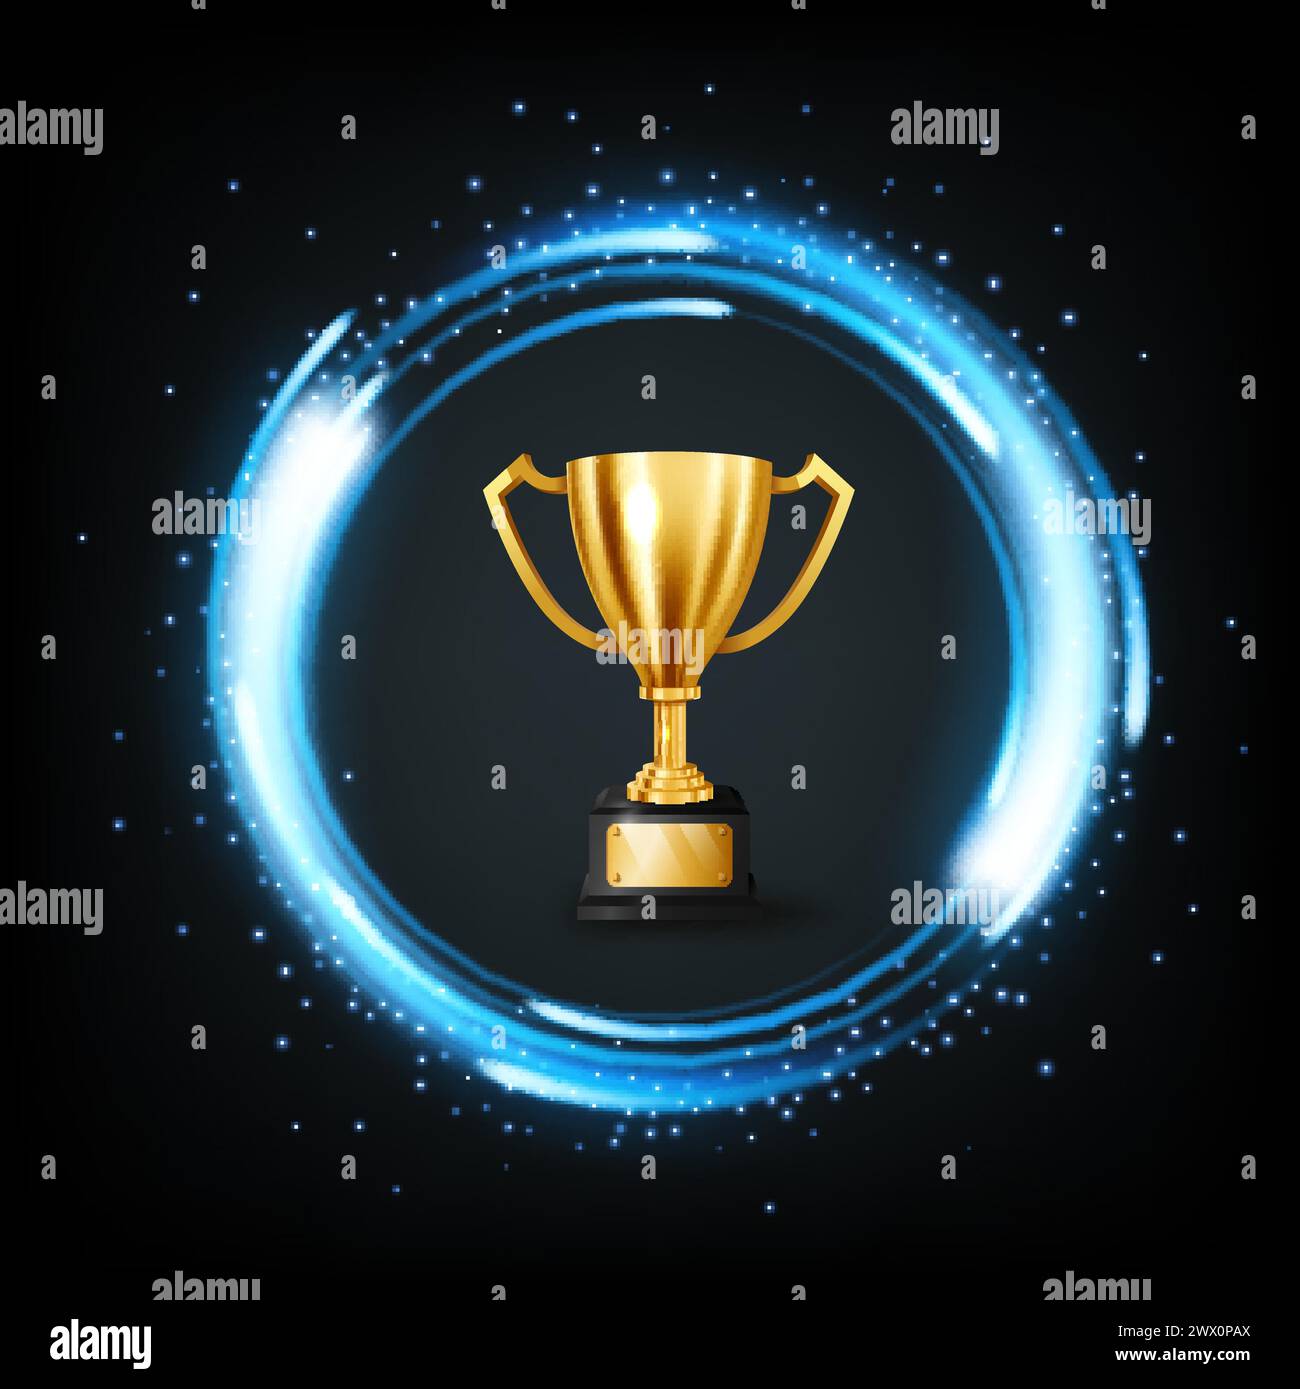 Realistic Golden Trophy Surrounded By A Spinning Blue Light, Vector Illustration Stock Vector